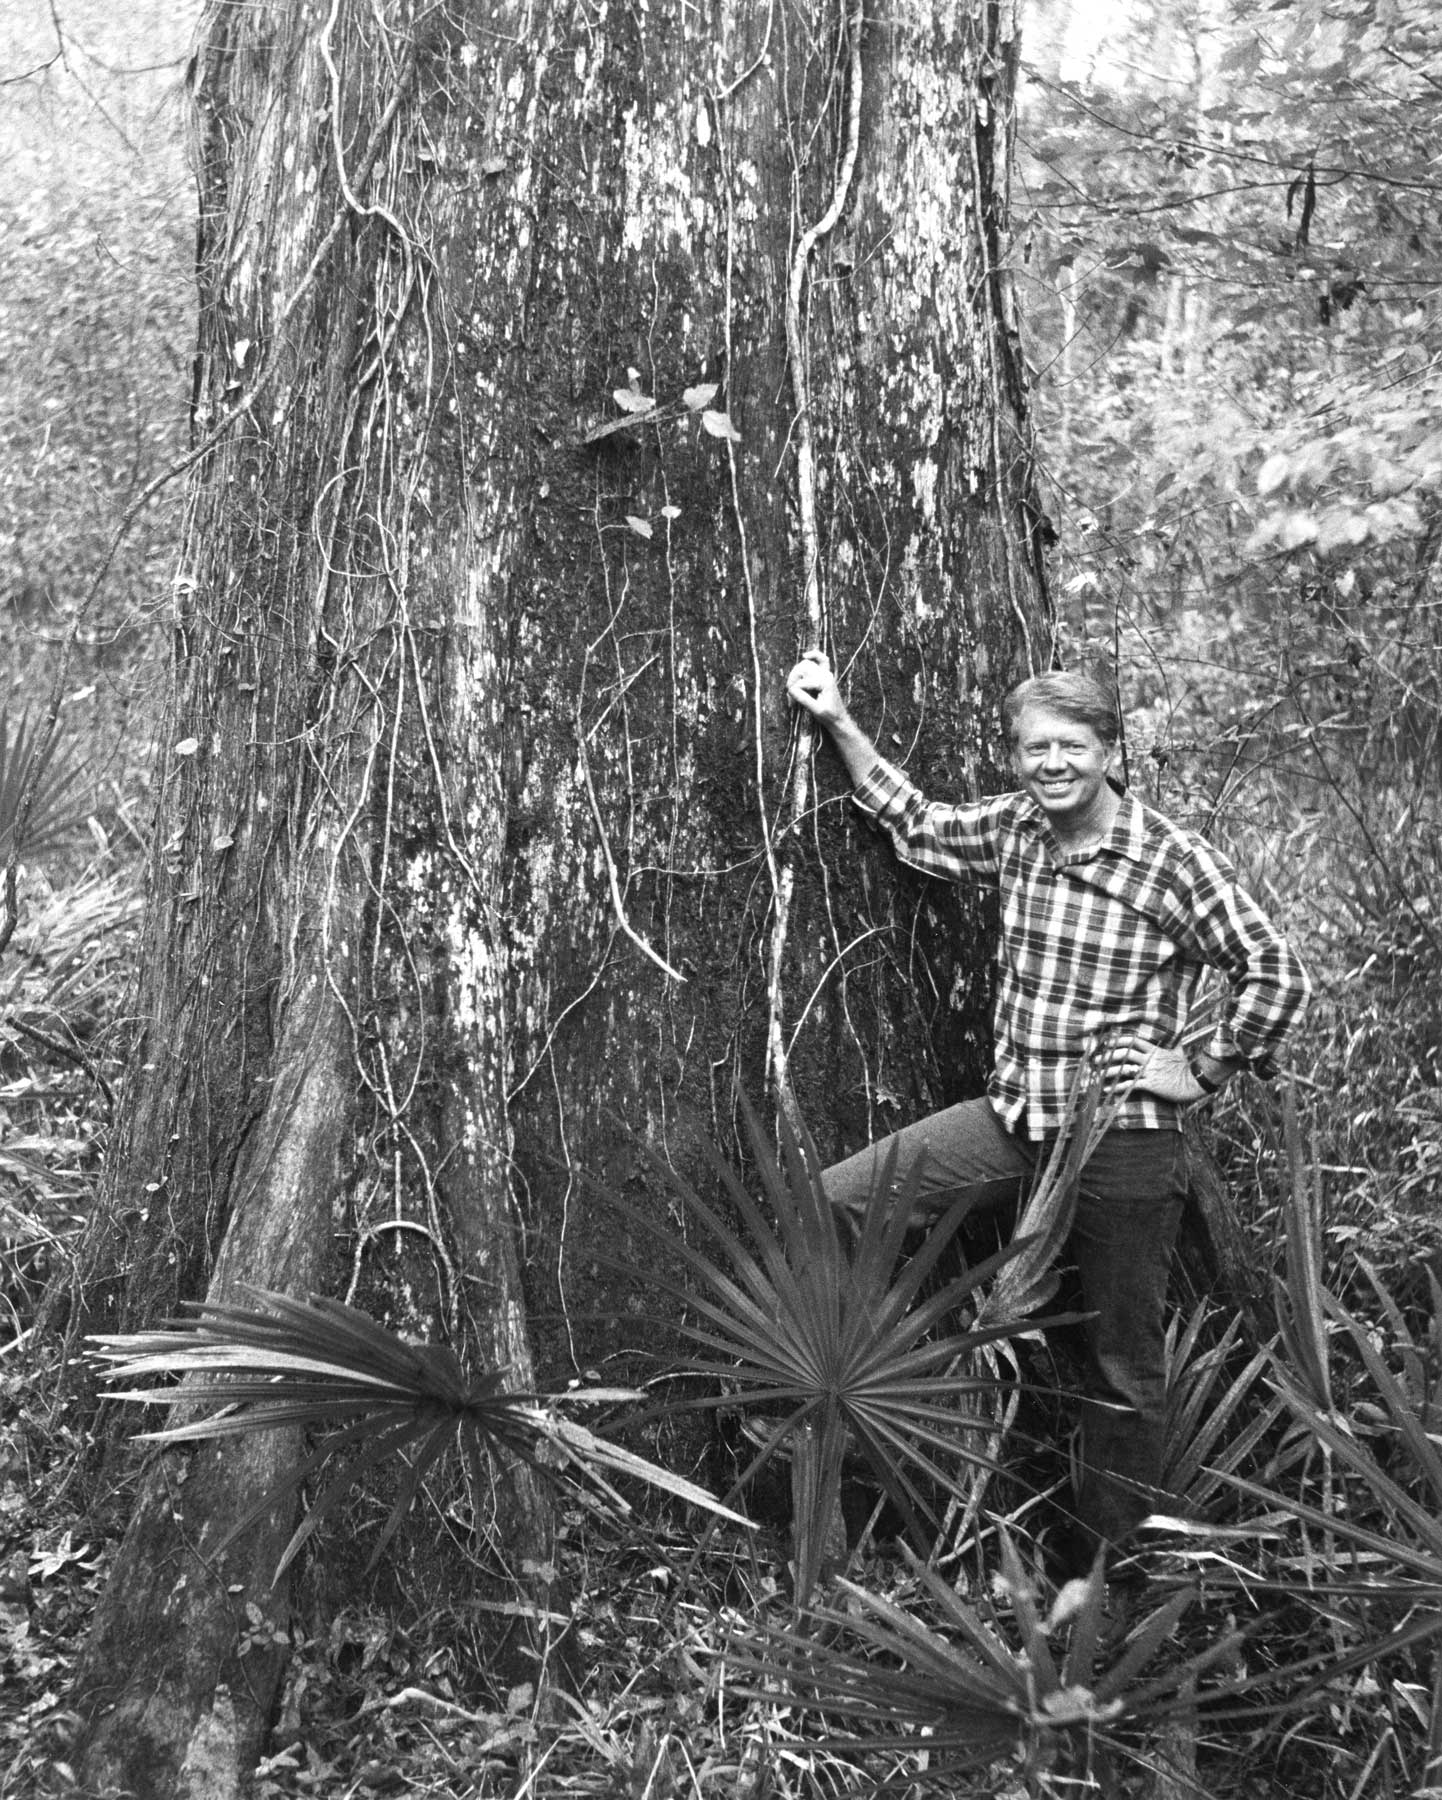 jimmy carter greatest conservationist president championed environmental activism.